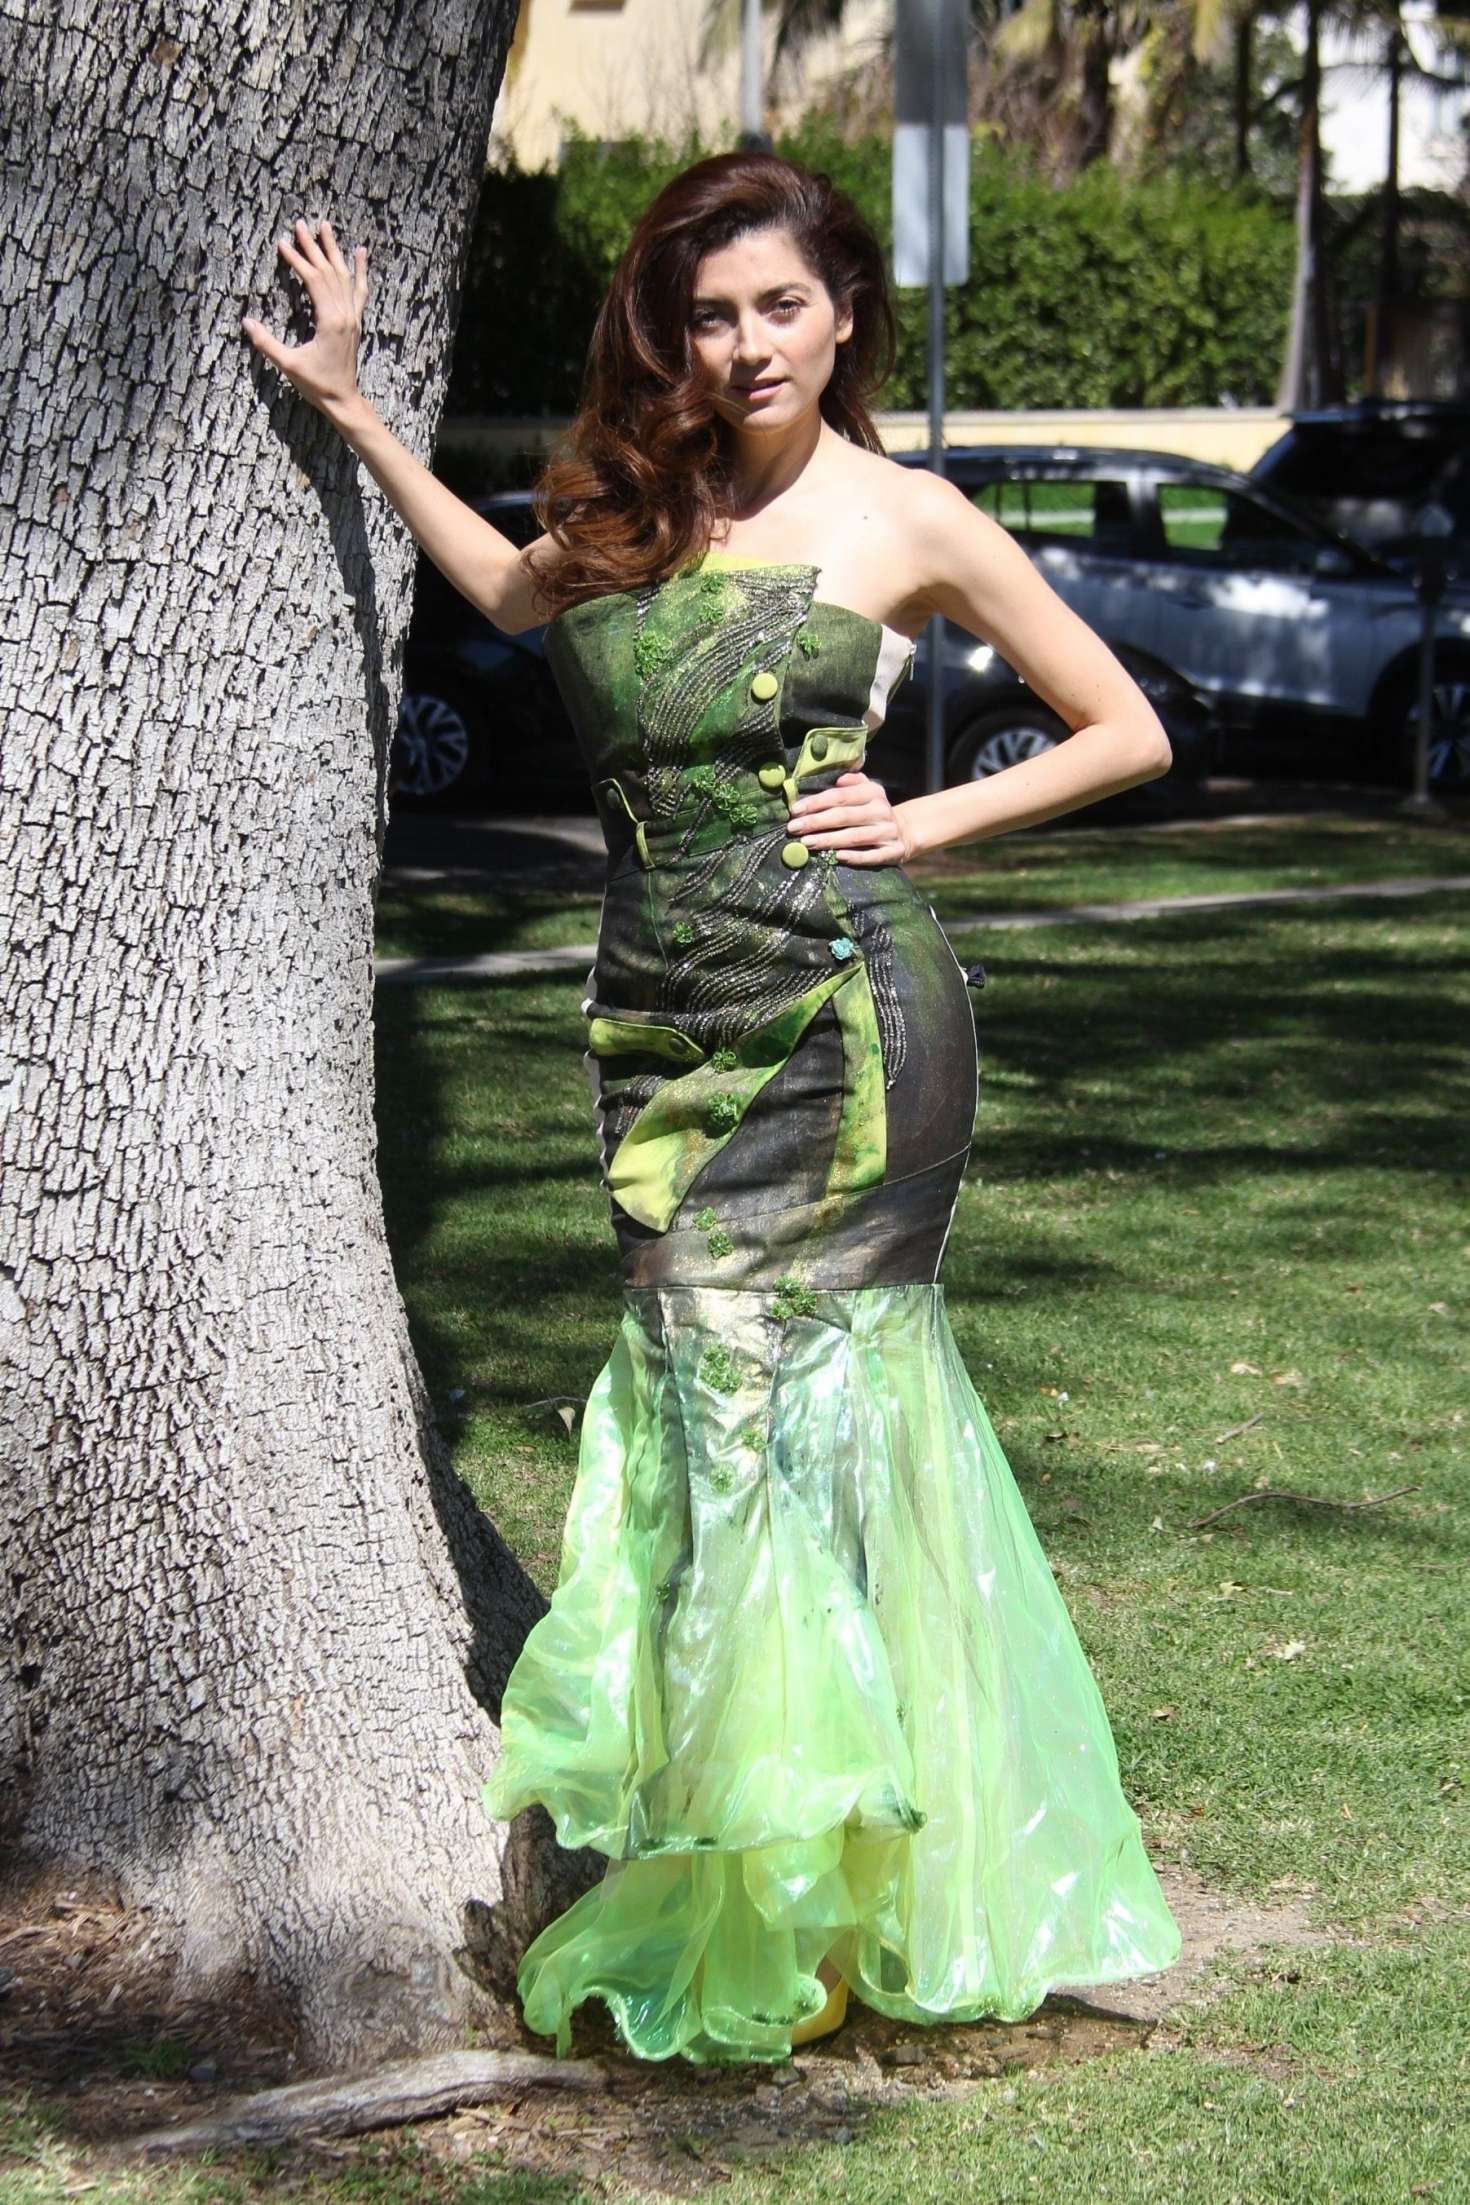 Blanca Blanco in Green Dress - Photoshoot at the park in LA